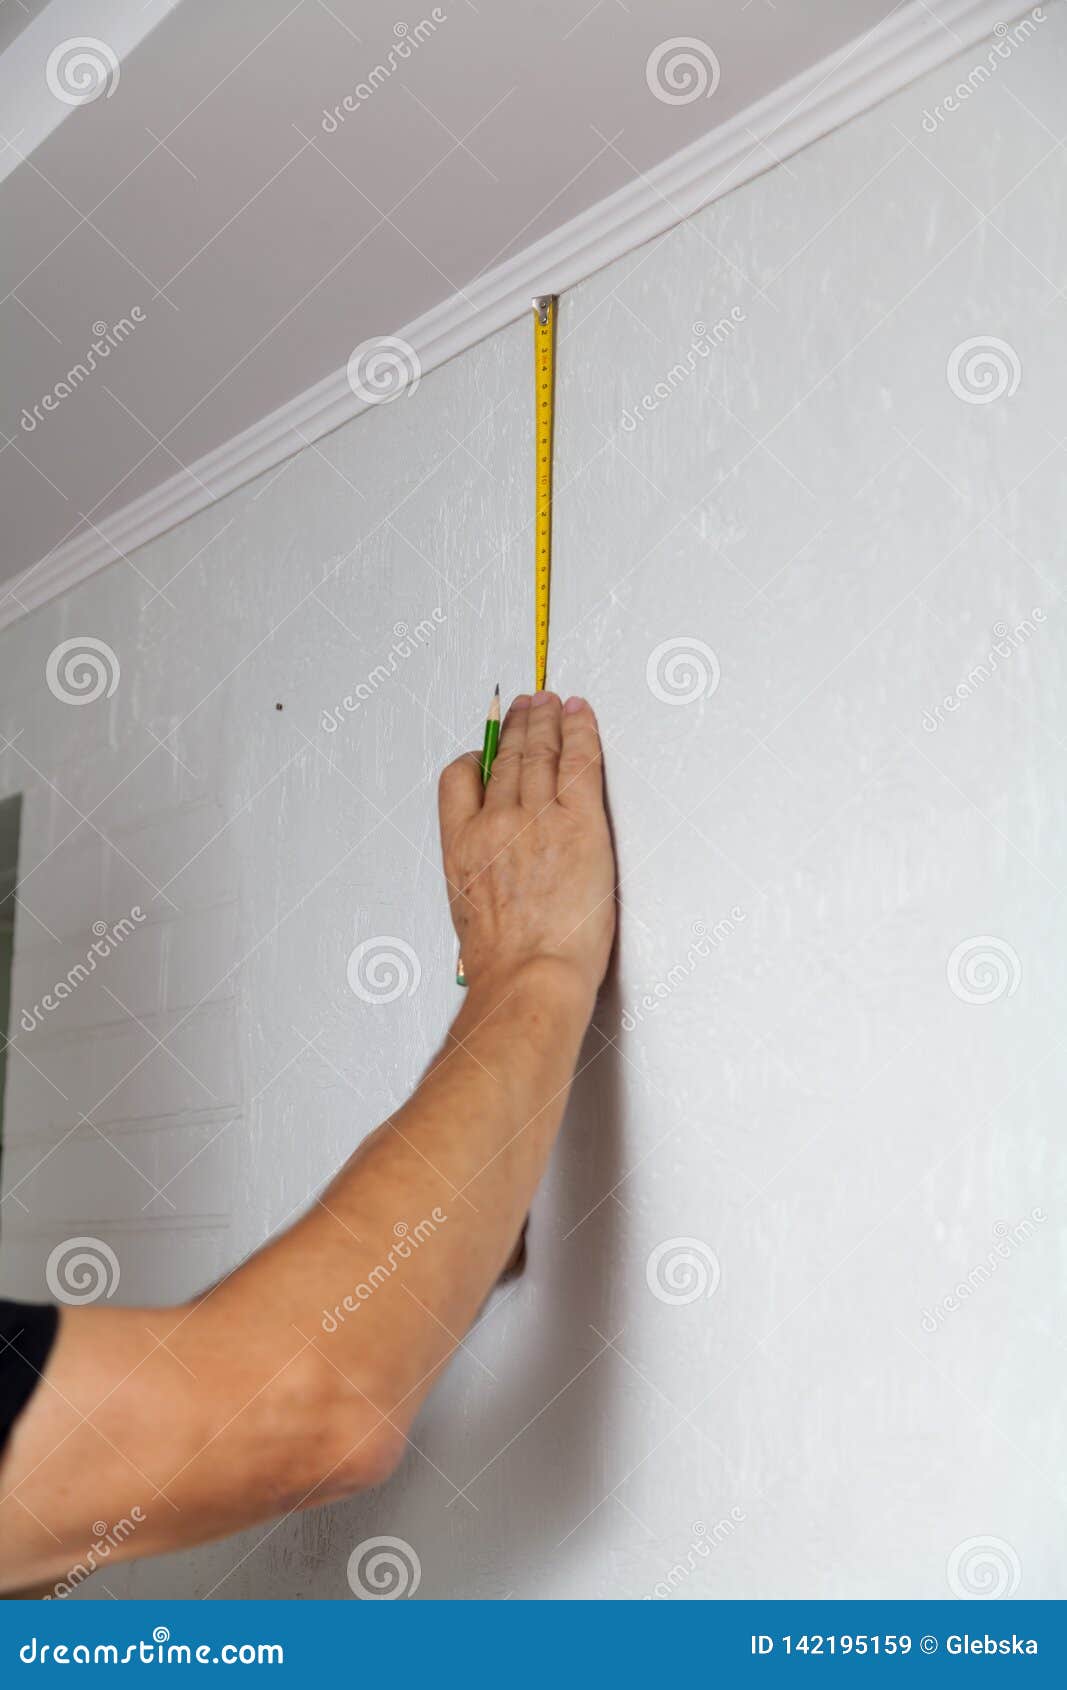 Hands Make Wall Marking With Tape Measure And Pencil Stock